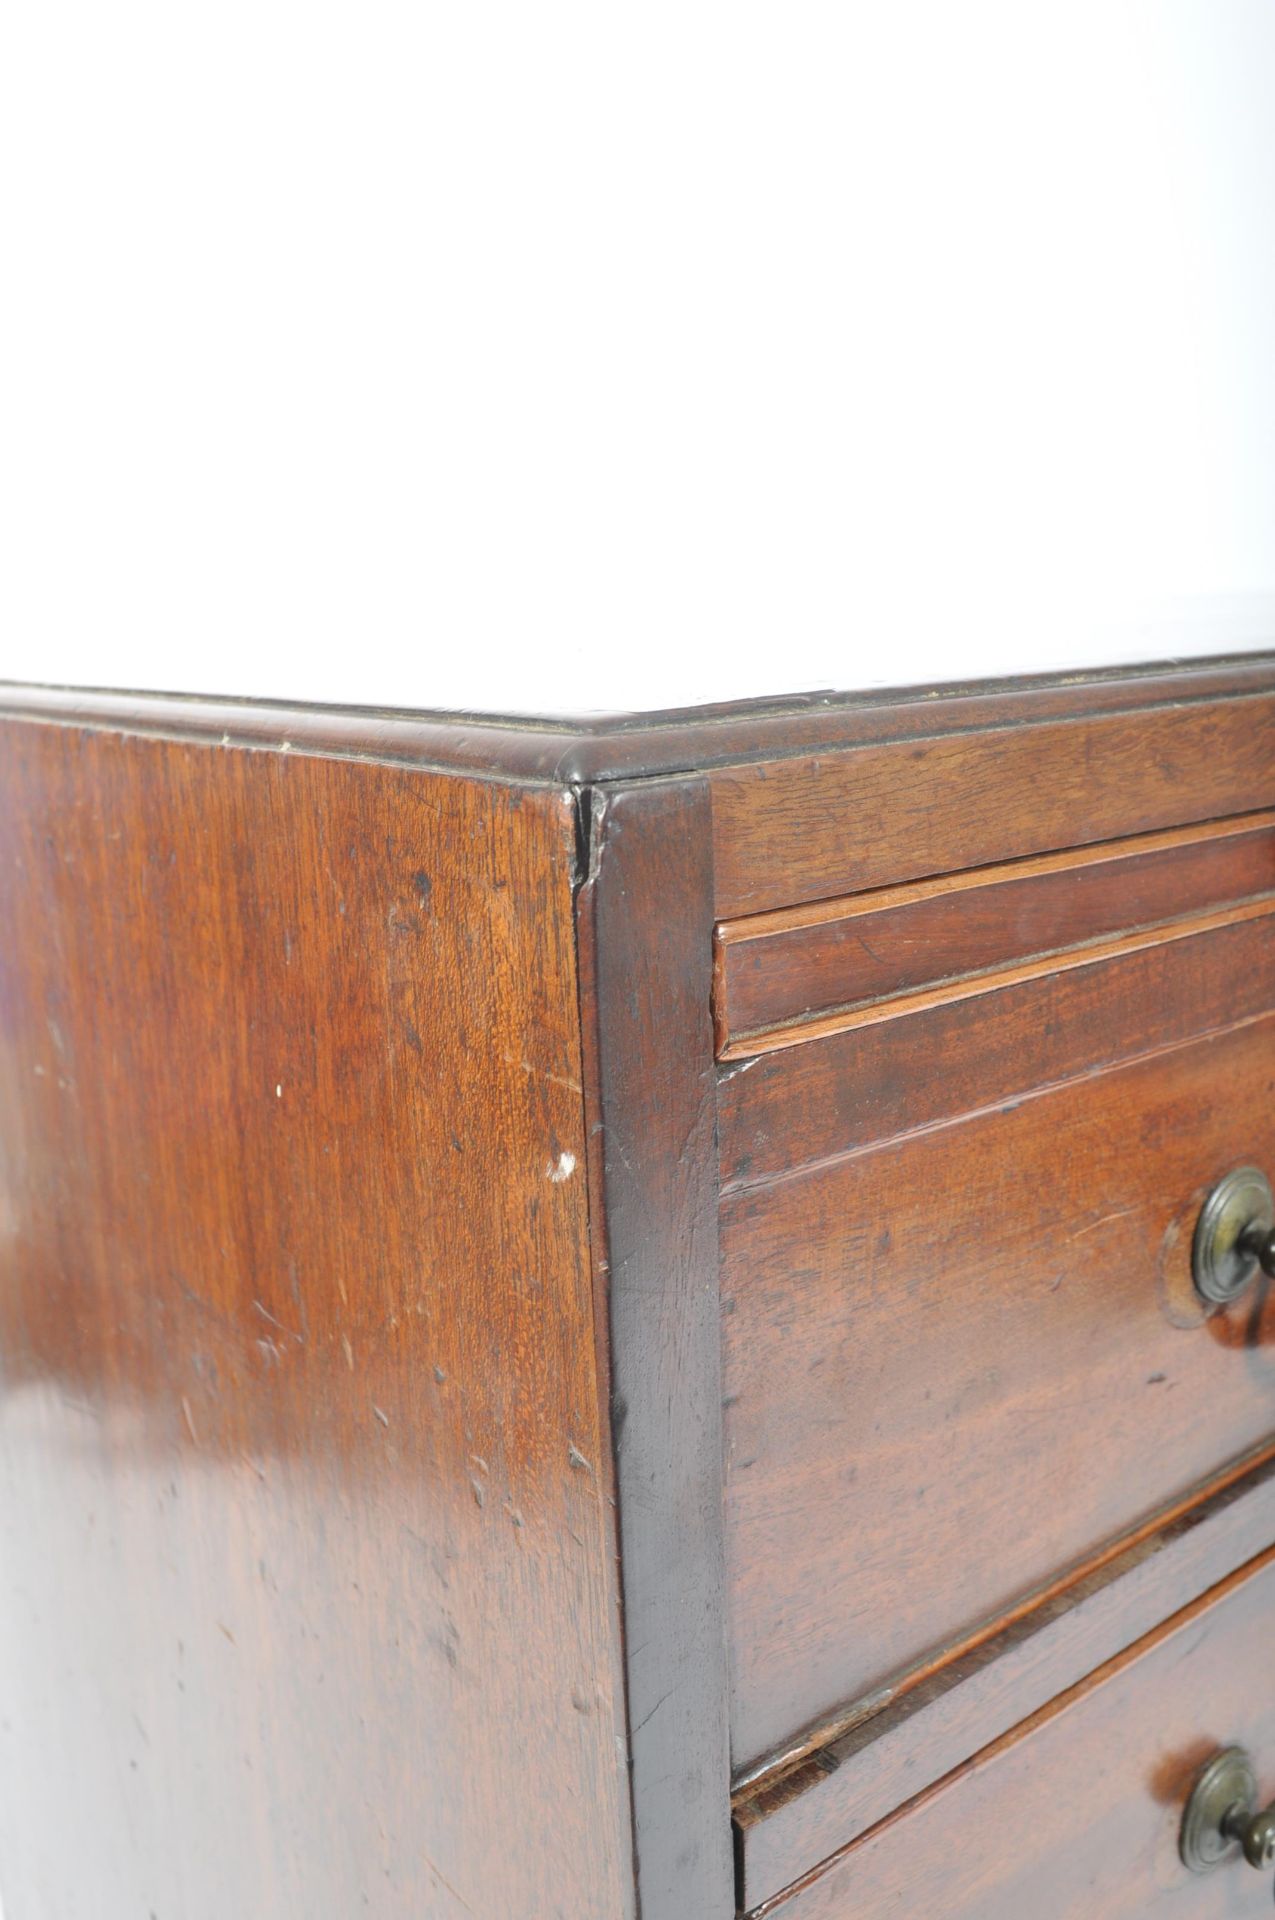 19TH CENTURY GEORGE III BACHELORS CHEST OF DRAWERS - Image 3 of 7